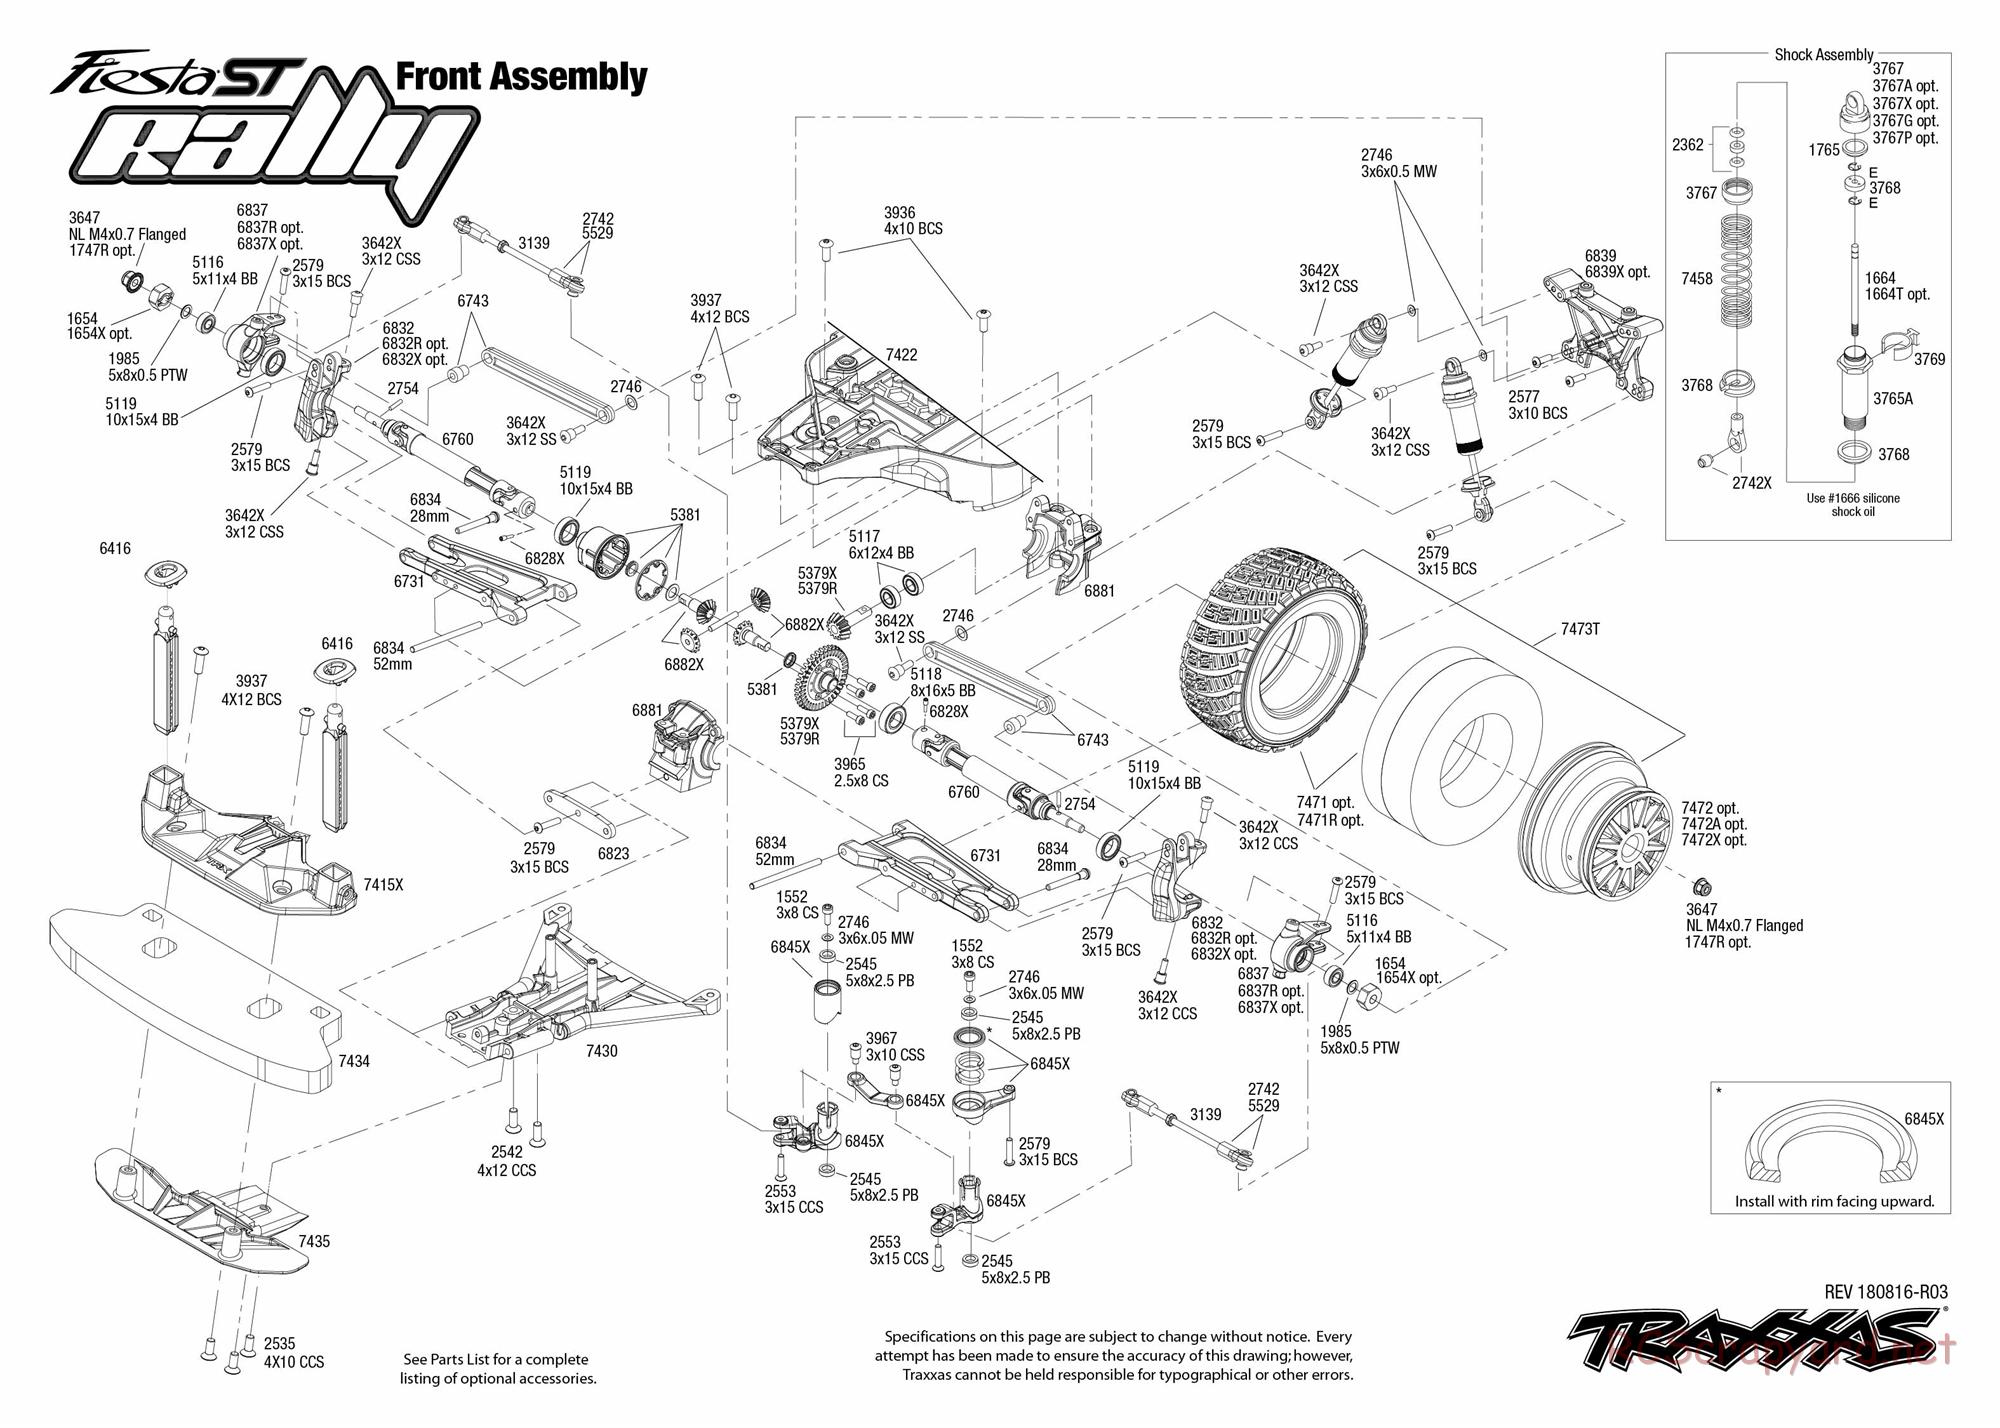 Traxxas - Ford Fiesta ST - NOS Deegan 38 Rally - Exploded Views - Page 3